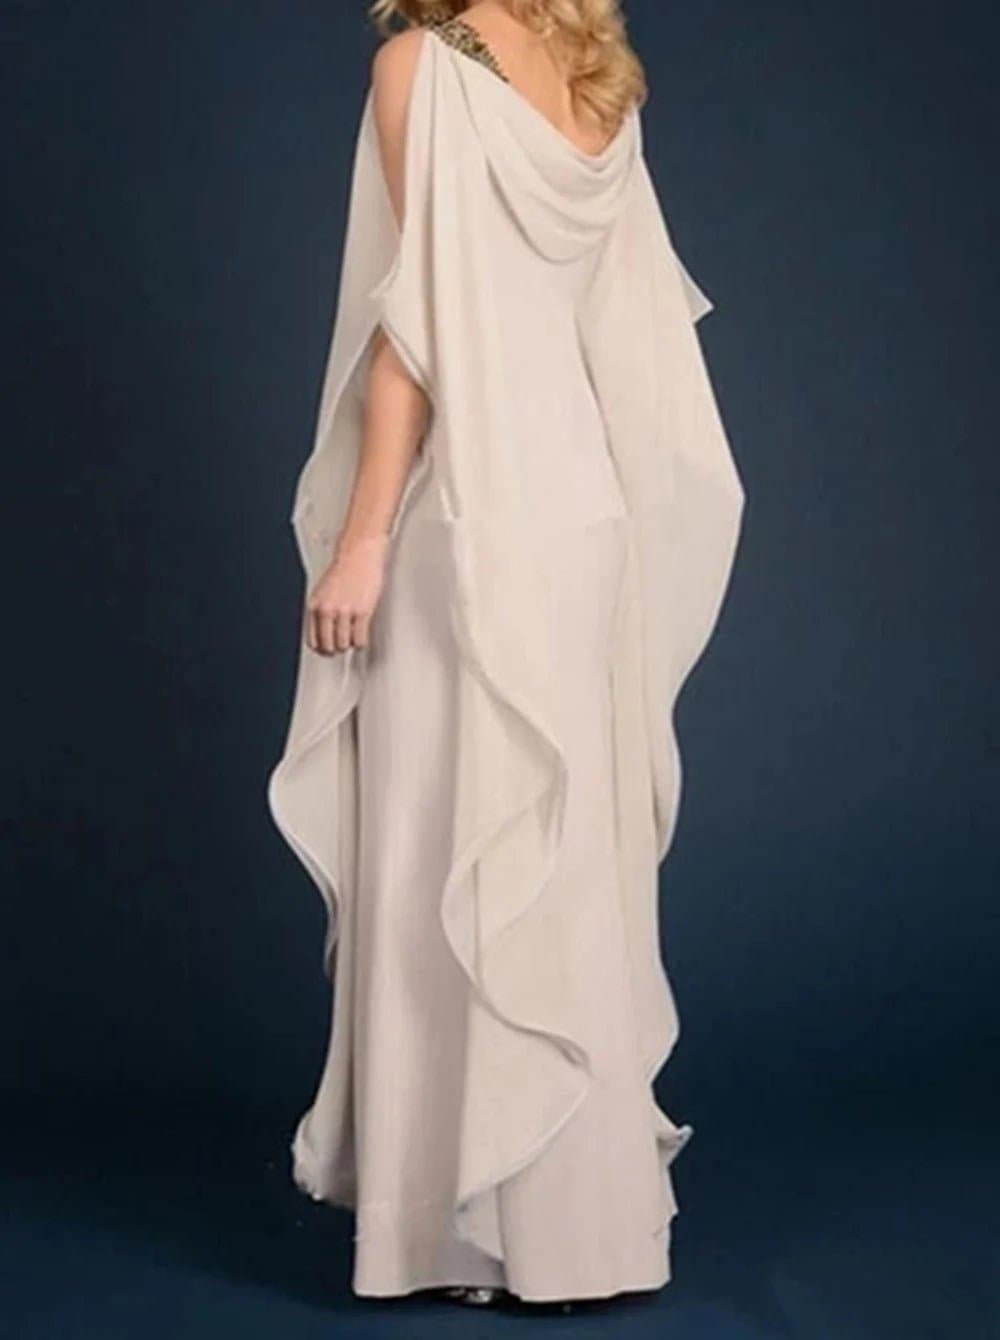 Long Chiffon Evening Gown with Half Sleeves, Floor-Length A-Line Silhouette - Wandering Woman